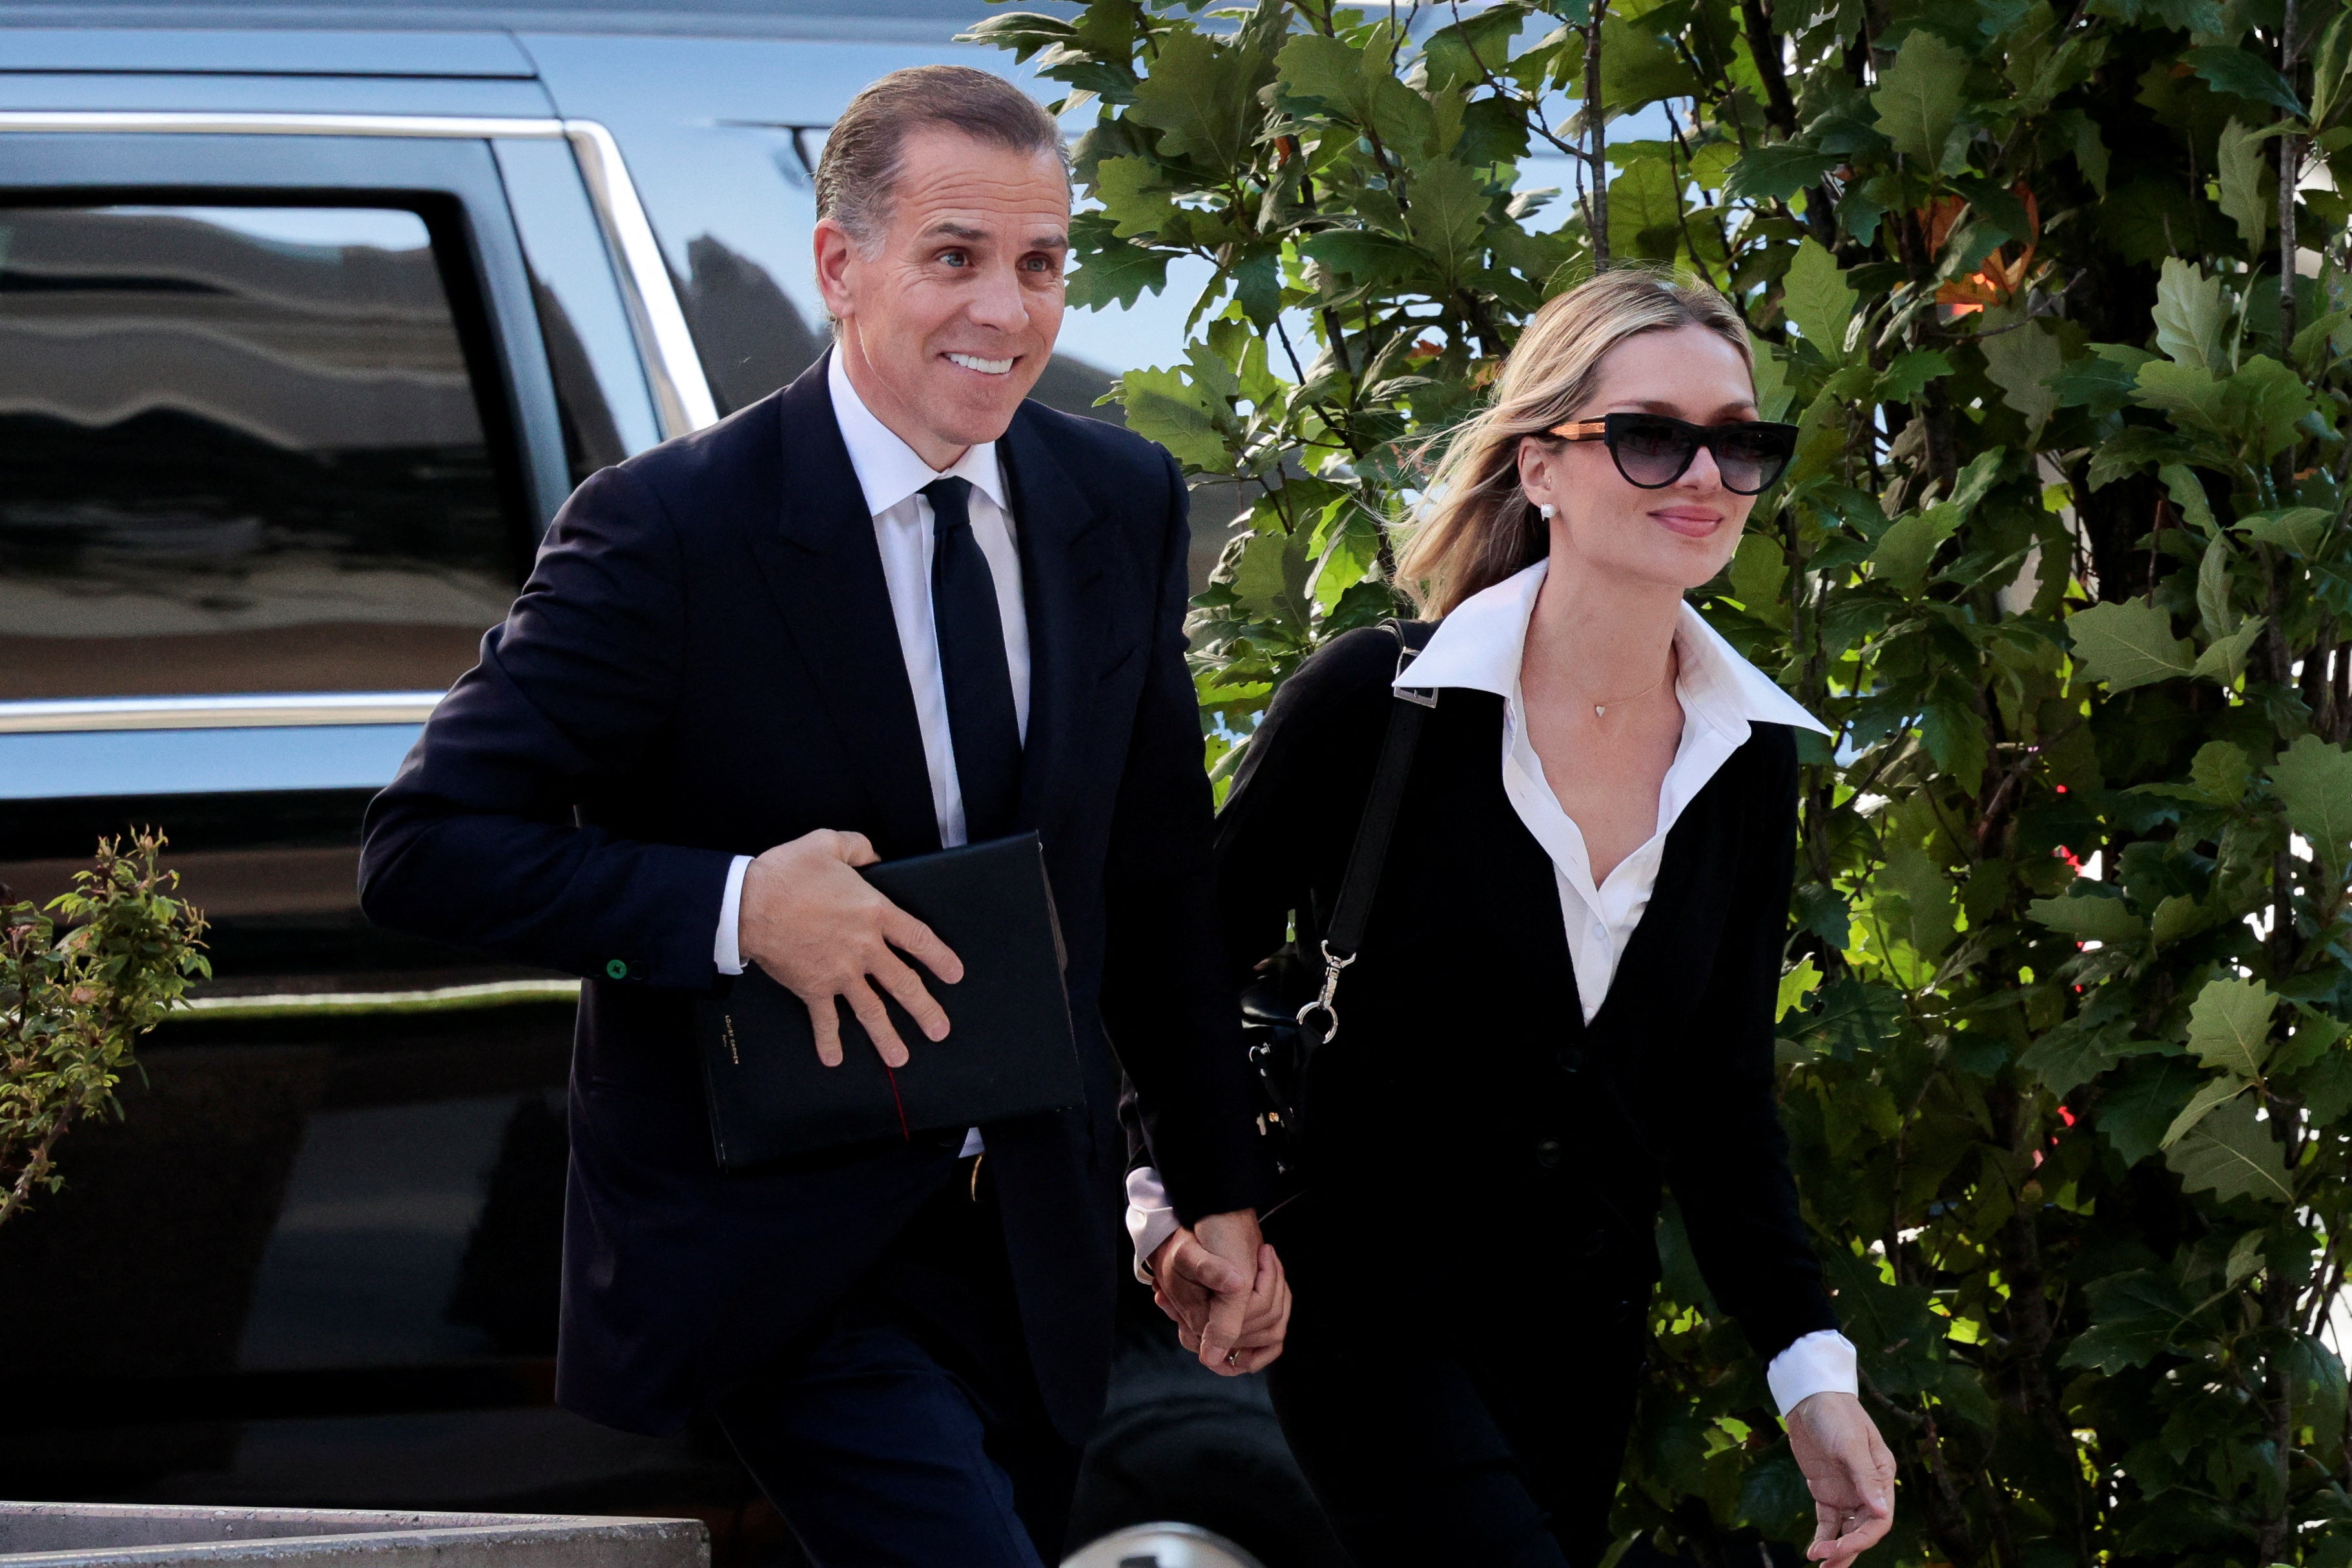 Hunter Biden, son of U.S. President Joe Biden, arrives with his wife Melissa Cohen Biden at the federal court for his trial on criminal gun charges, in Wilmington, Delaware, U.S., June 10, 2024.